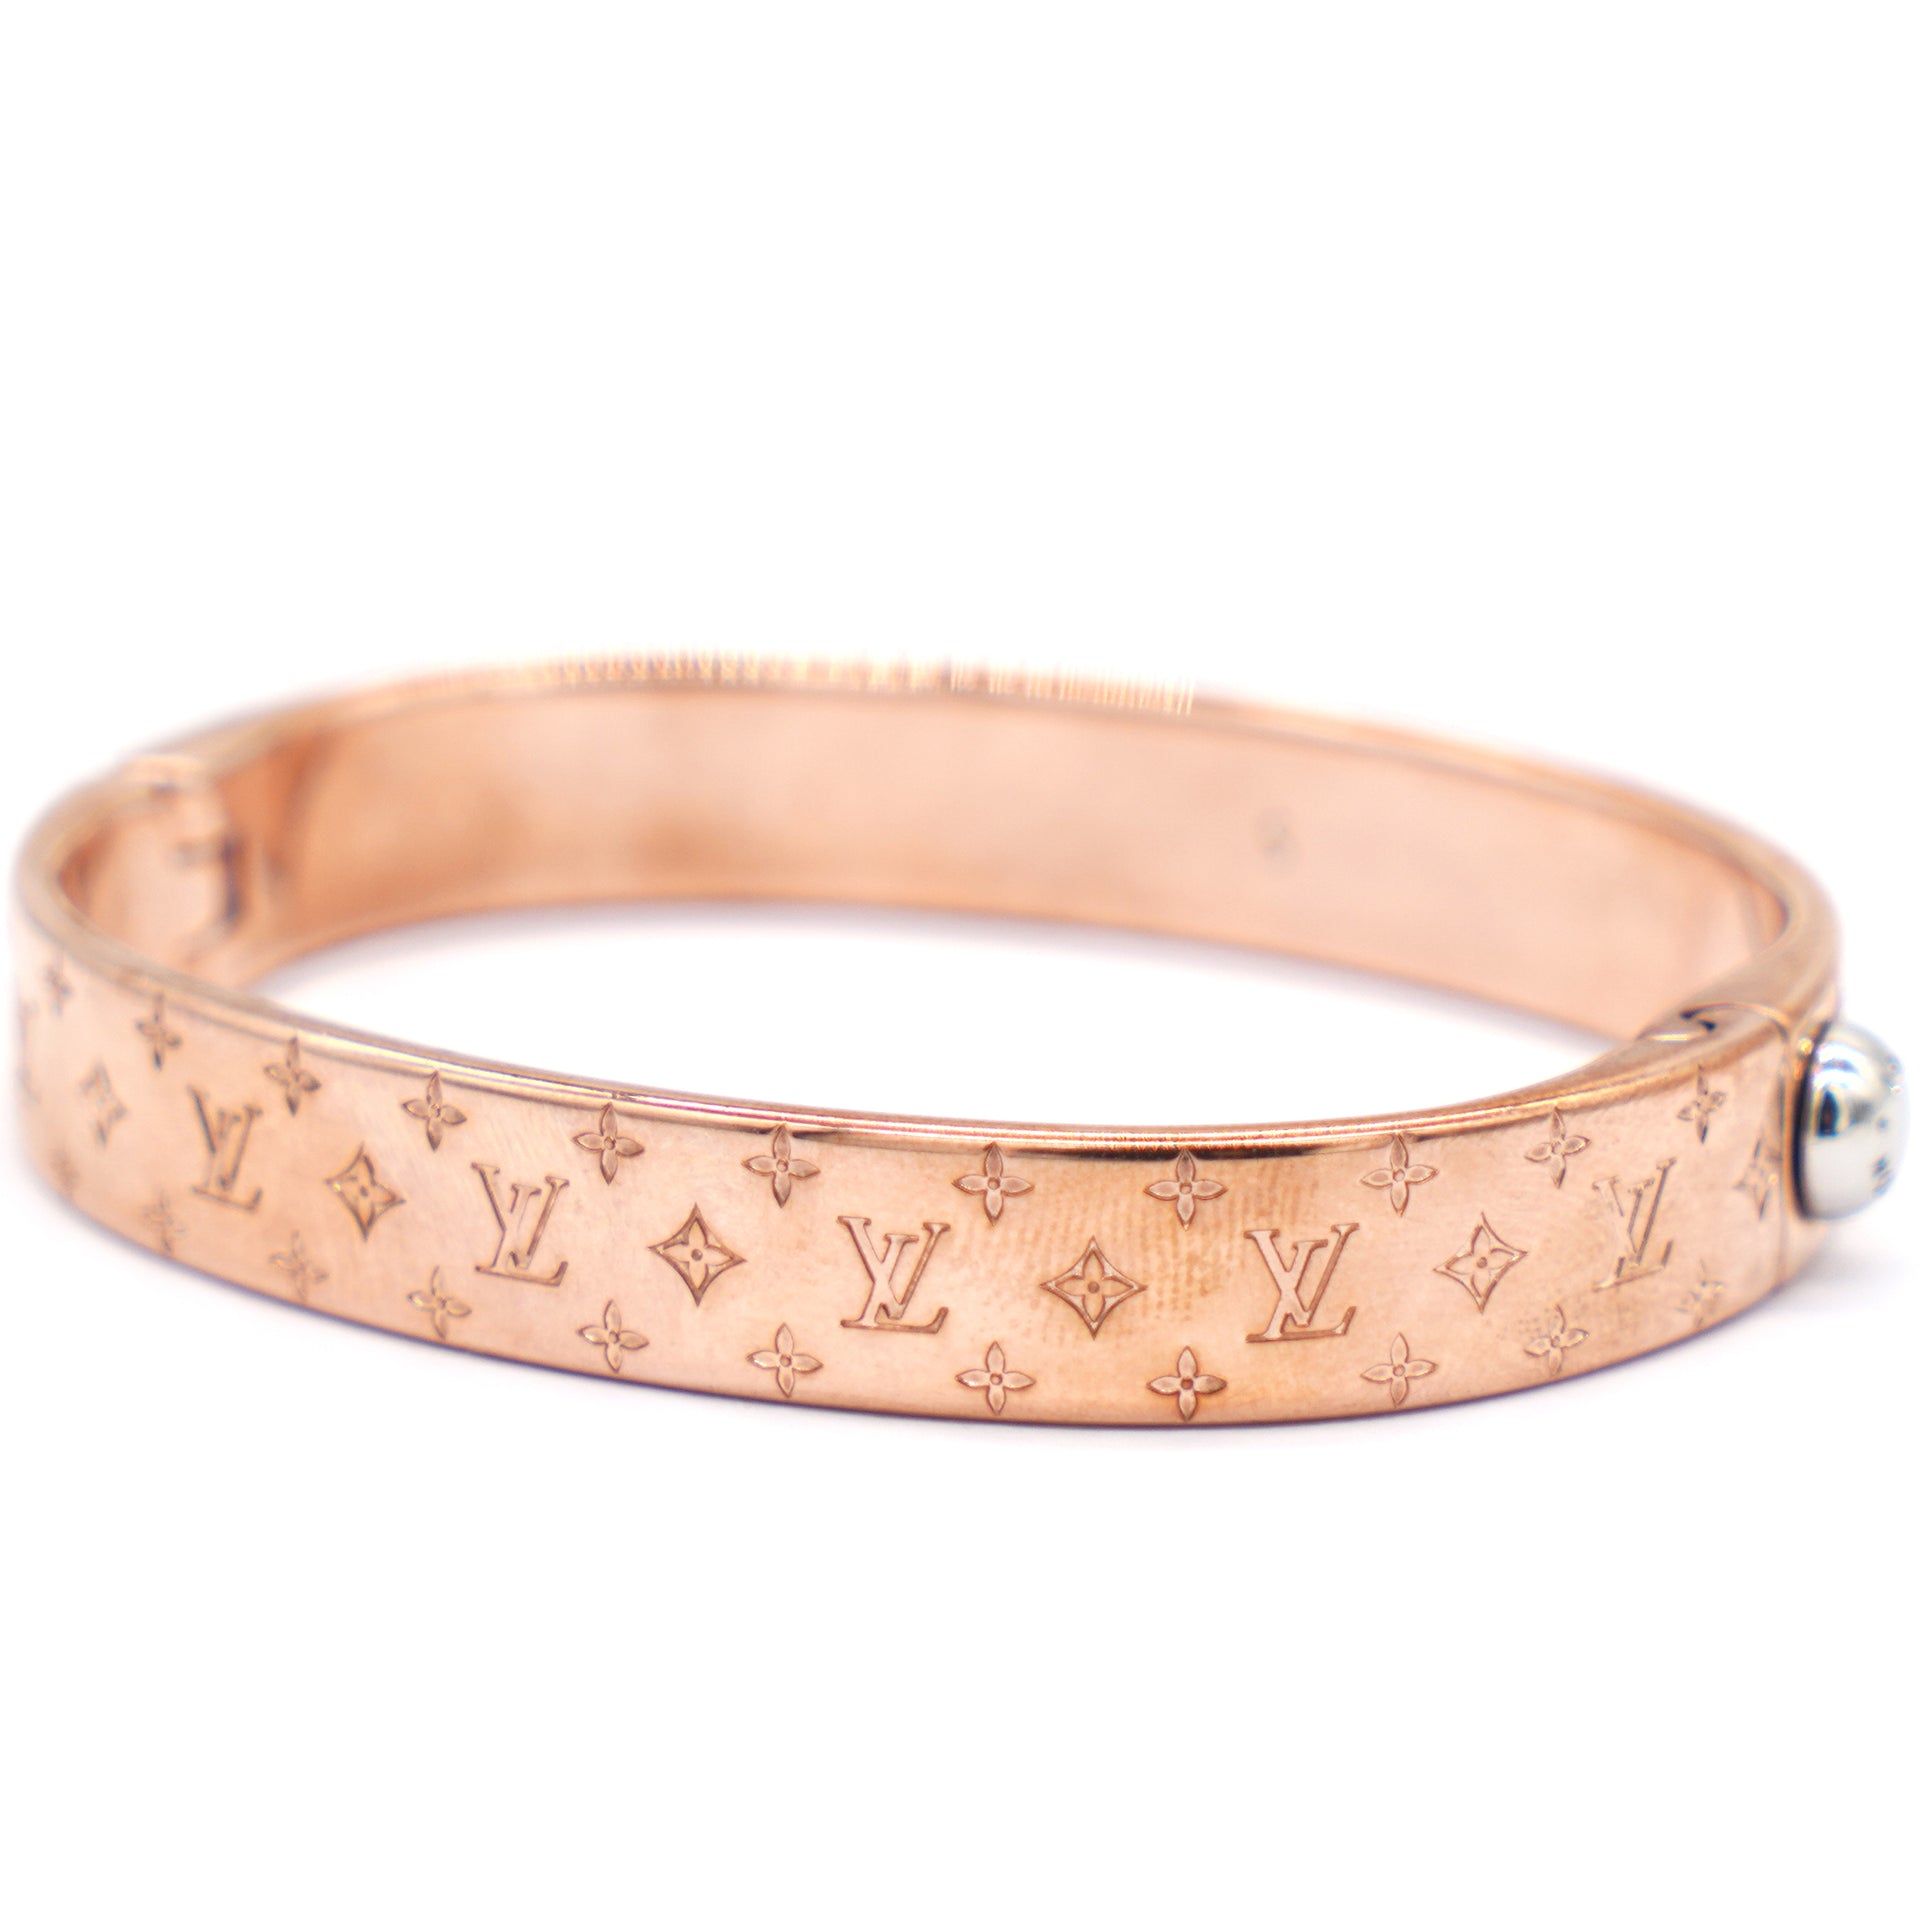 Louis Vuitton - Authenticated Monogram Bracelet - Leather Brown For Woman, Very Good condition